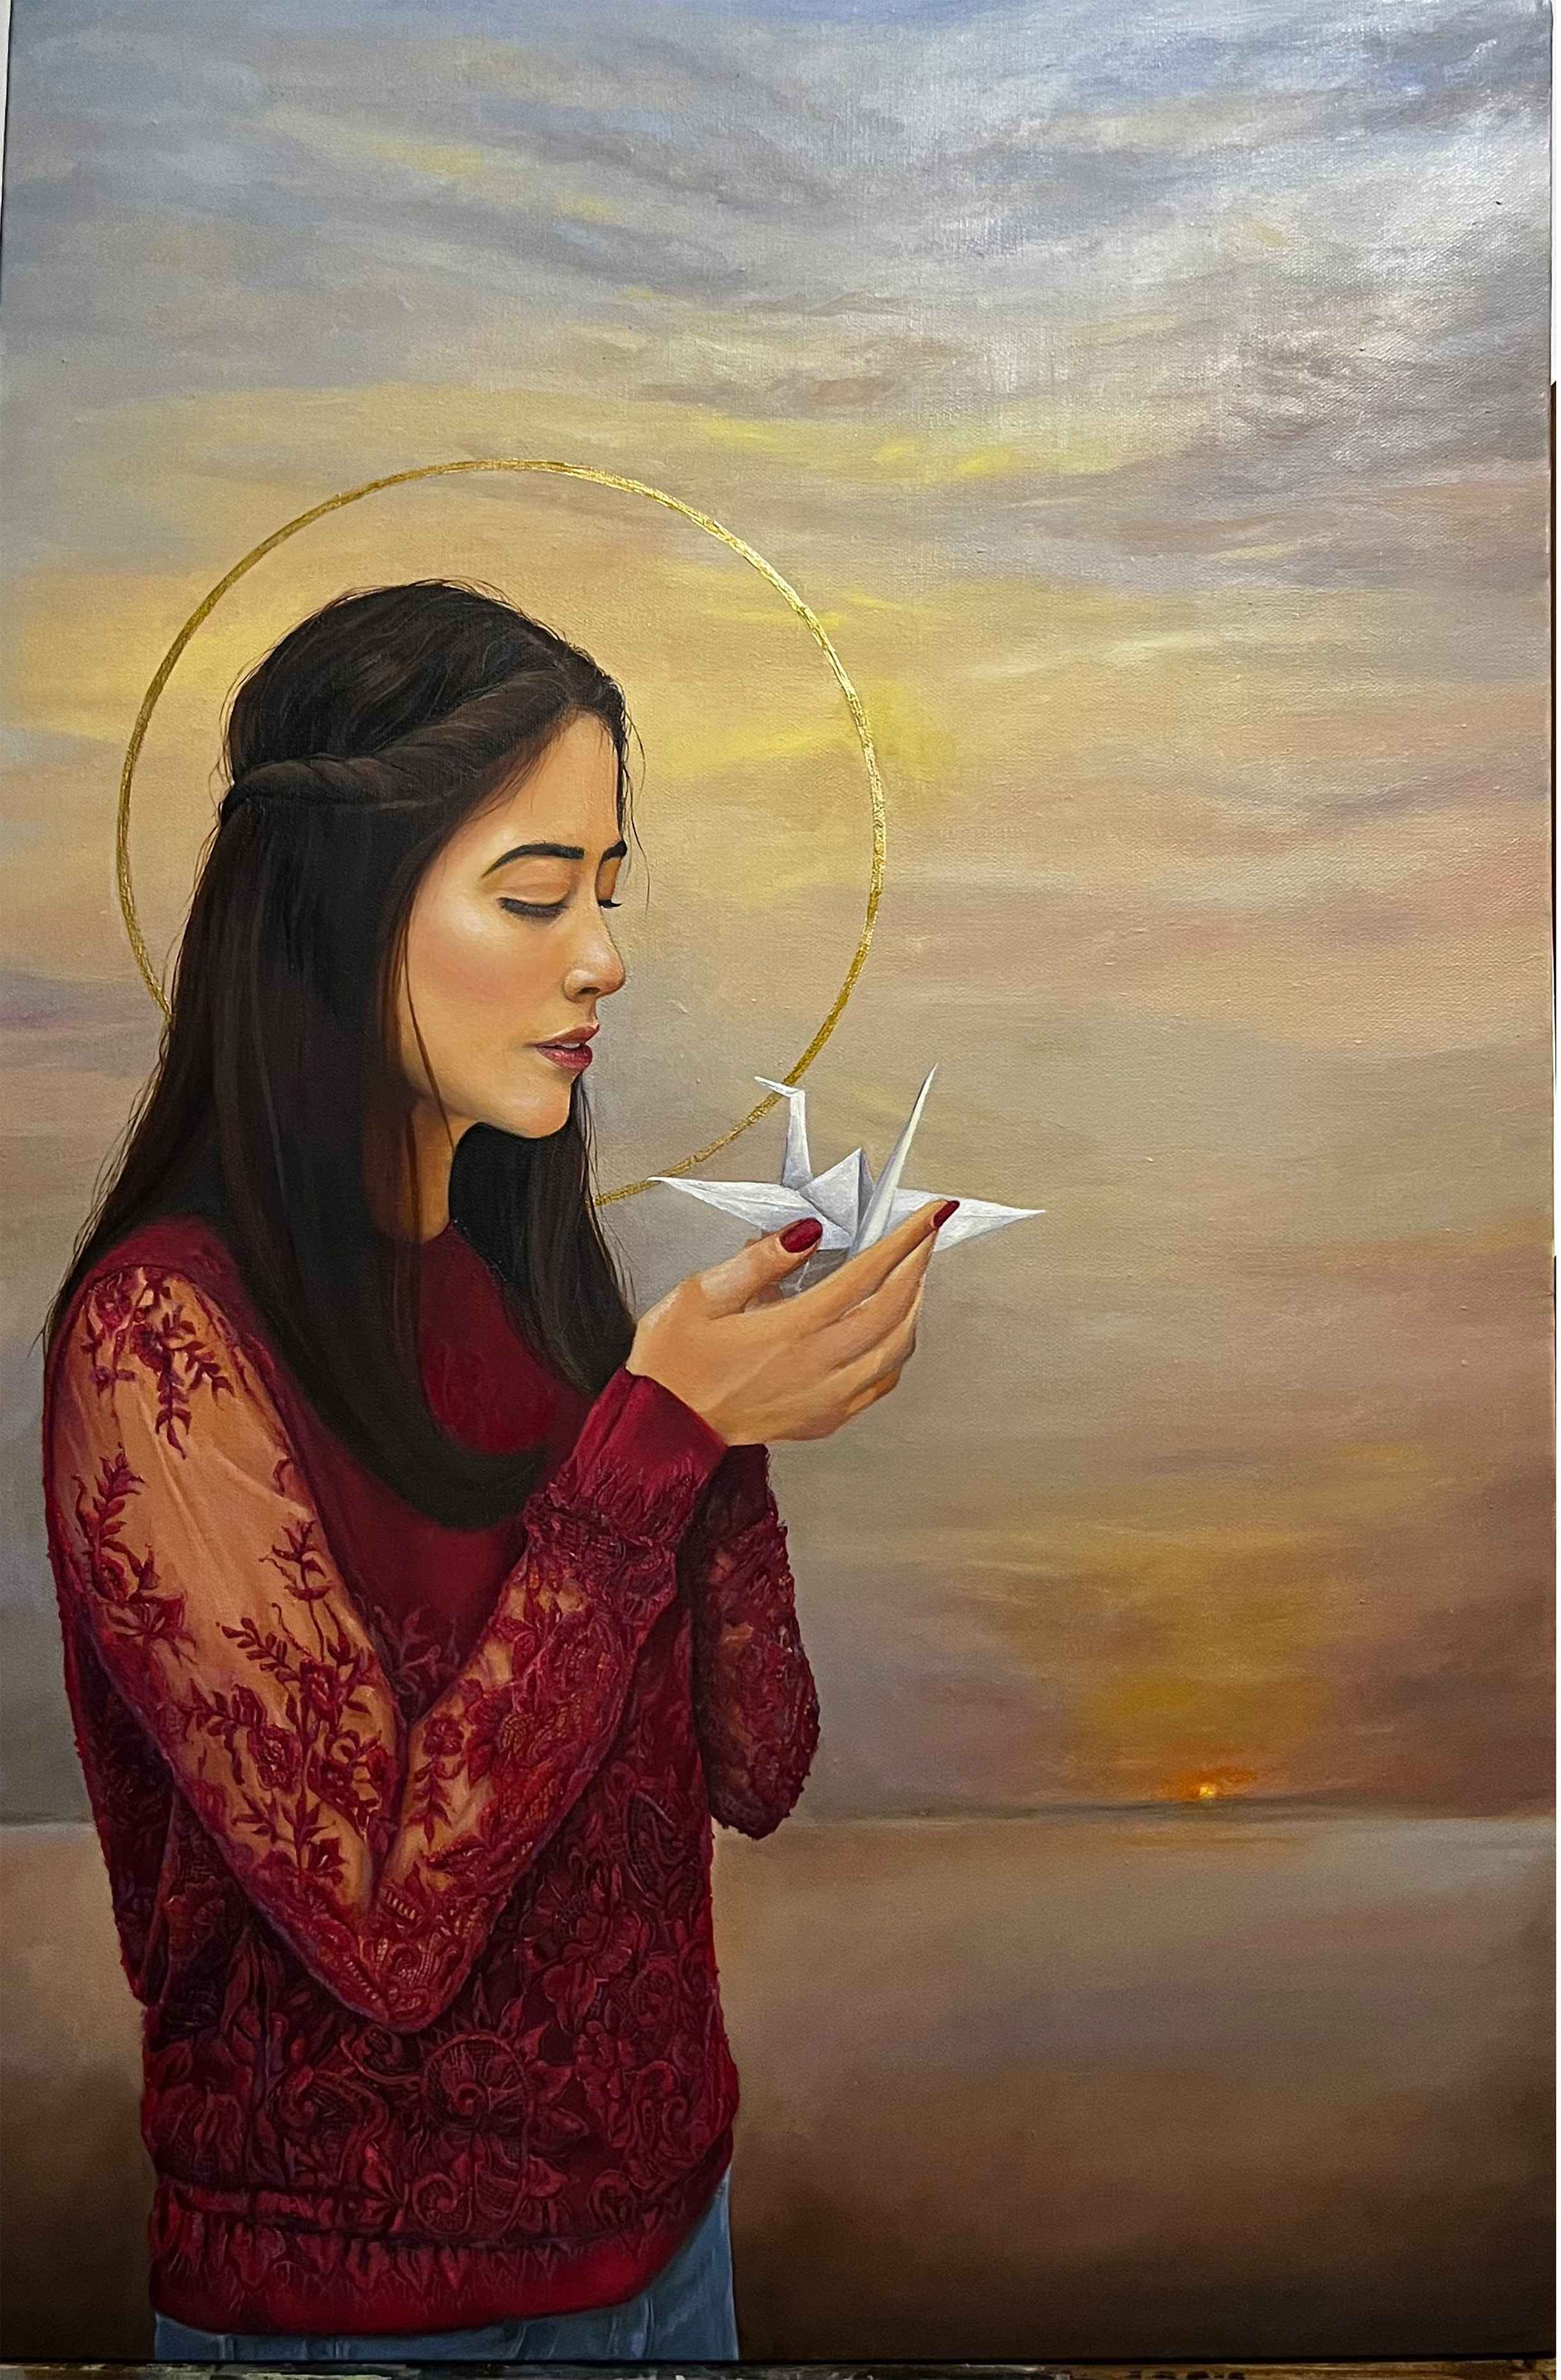 Artist:  Saba Haroon <br> Title: HOPES ENTWINED LLL <br>Medium: Oil on canvas<br> Size: 24x36 inches